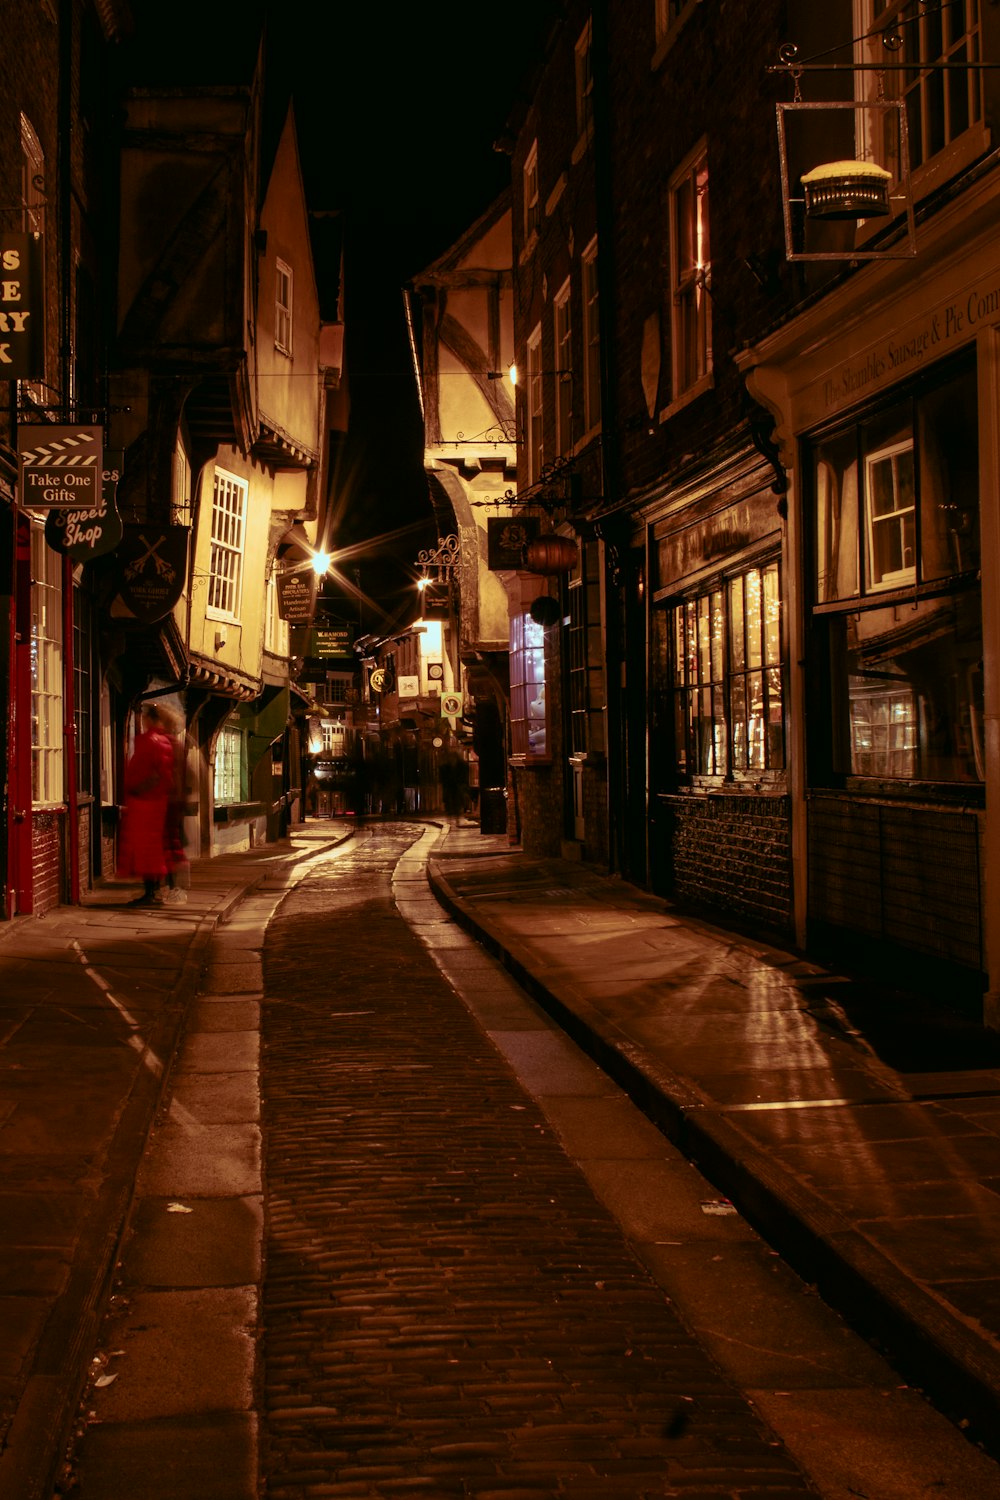 a narrow street at night with a red fire hydrant